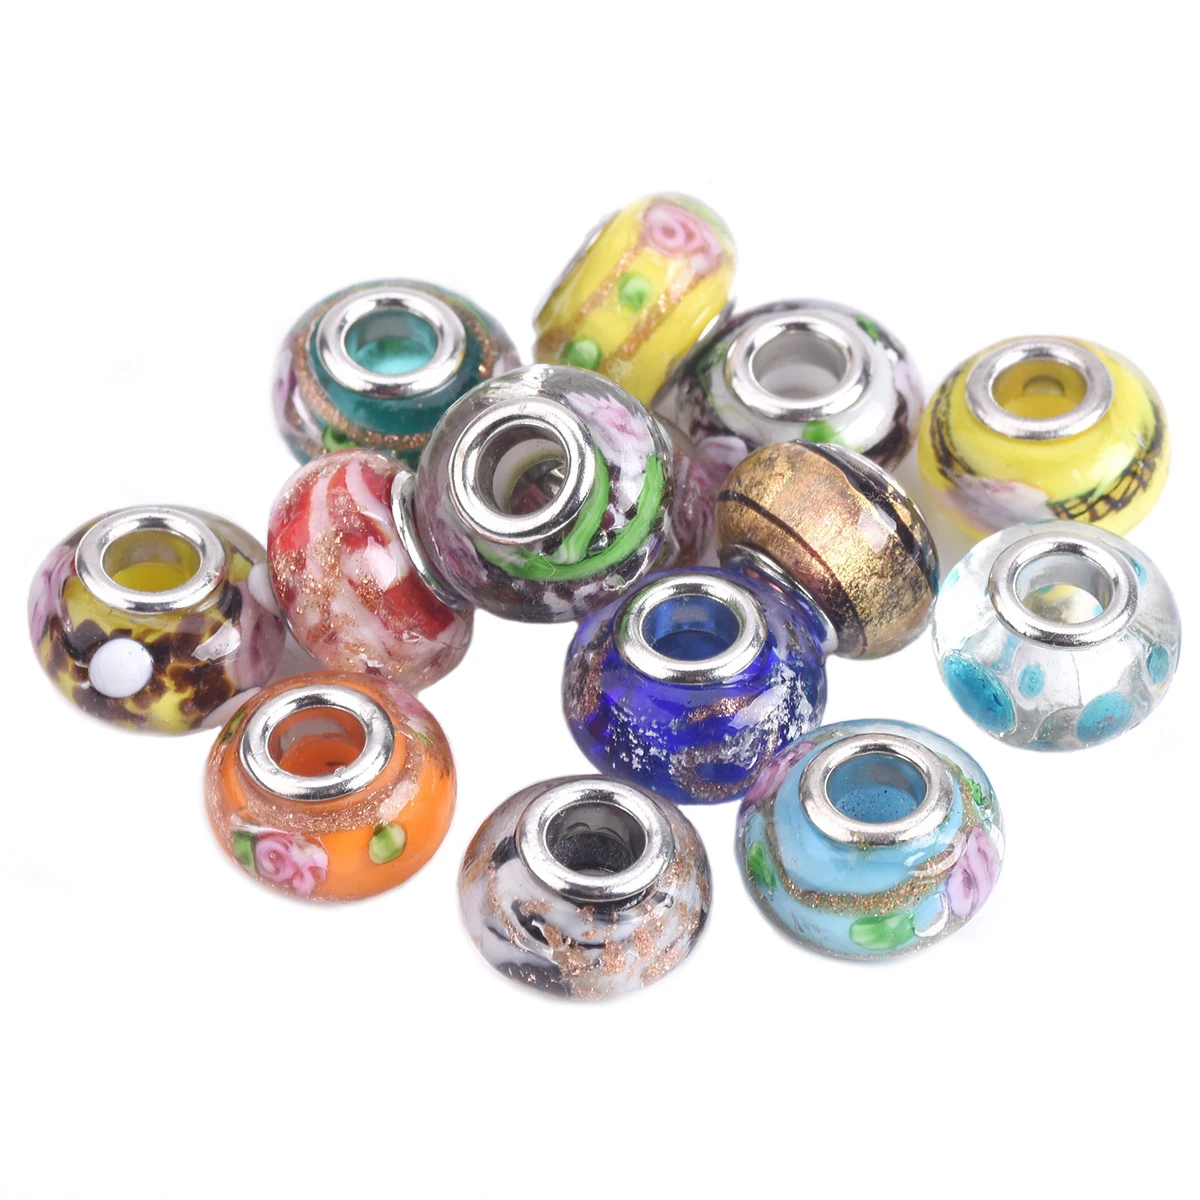 10pcs 15x9mm Round European Charms Murano Lampwork Glass Big Hole Beads for Jewelry Making Bracelet DIY 44#~110#